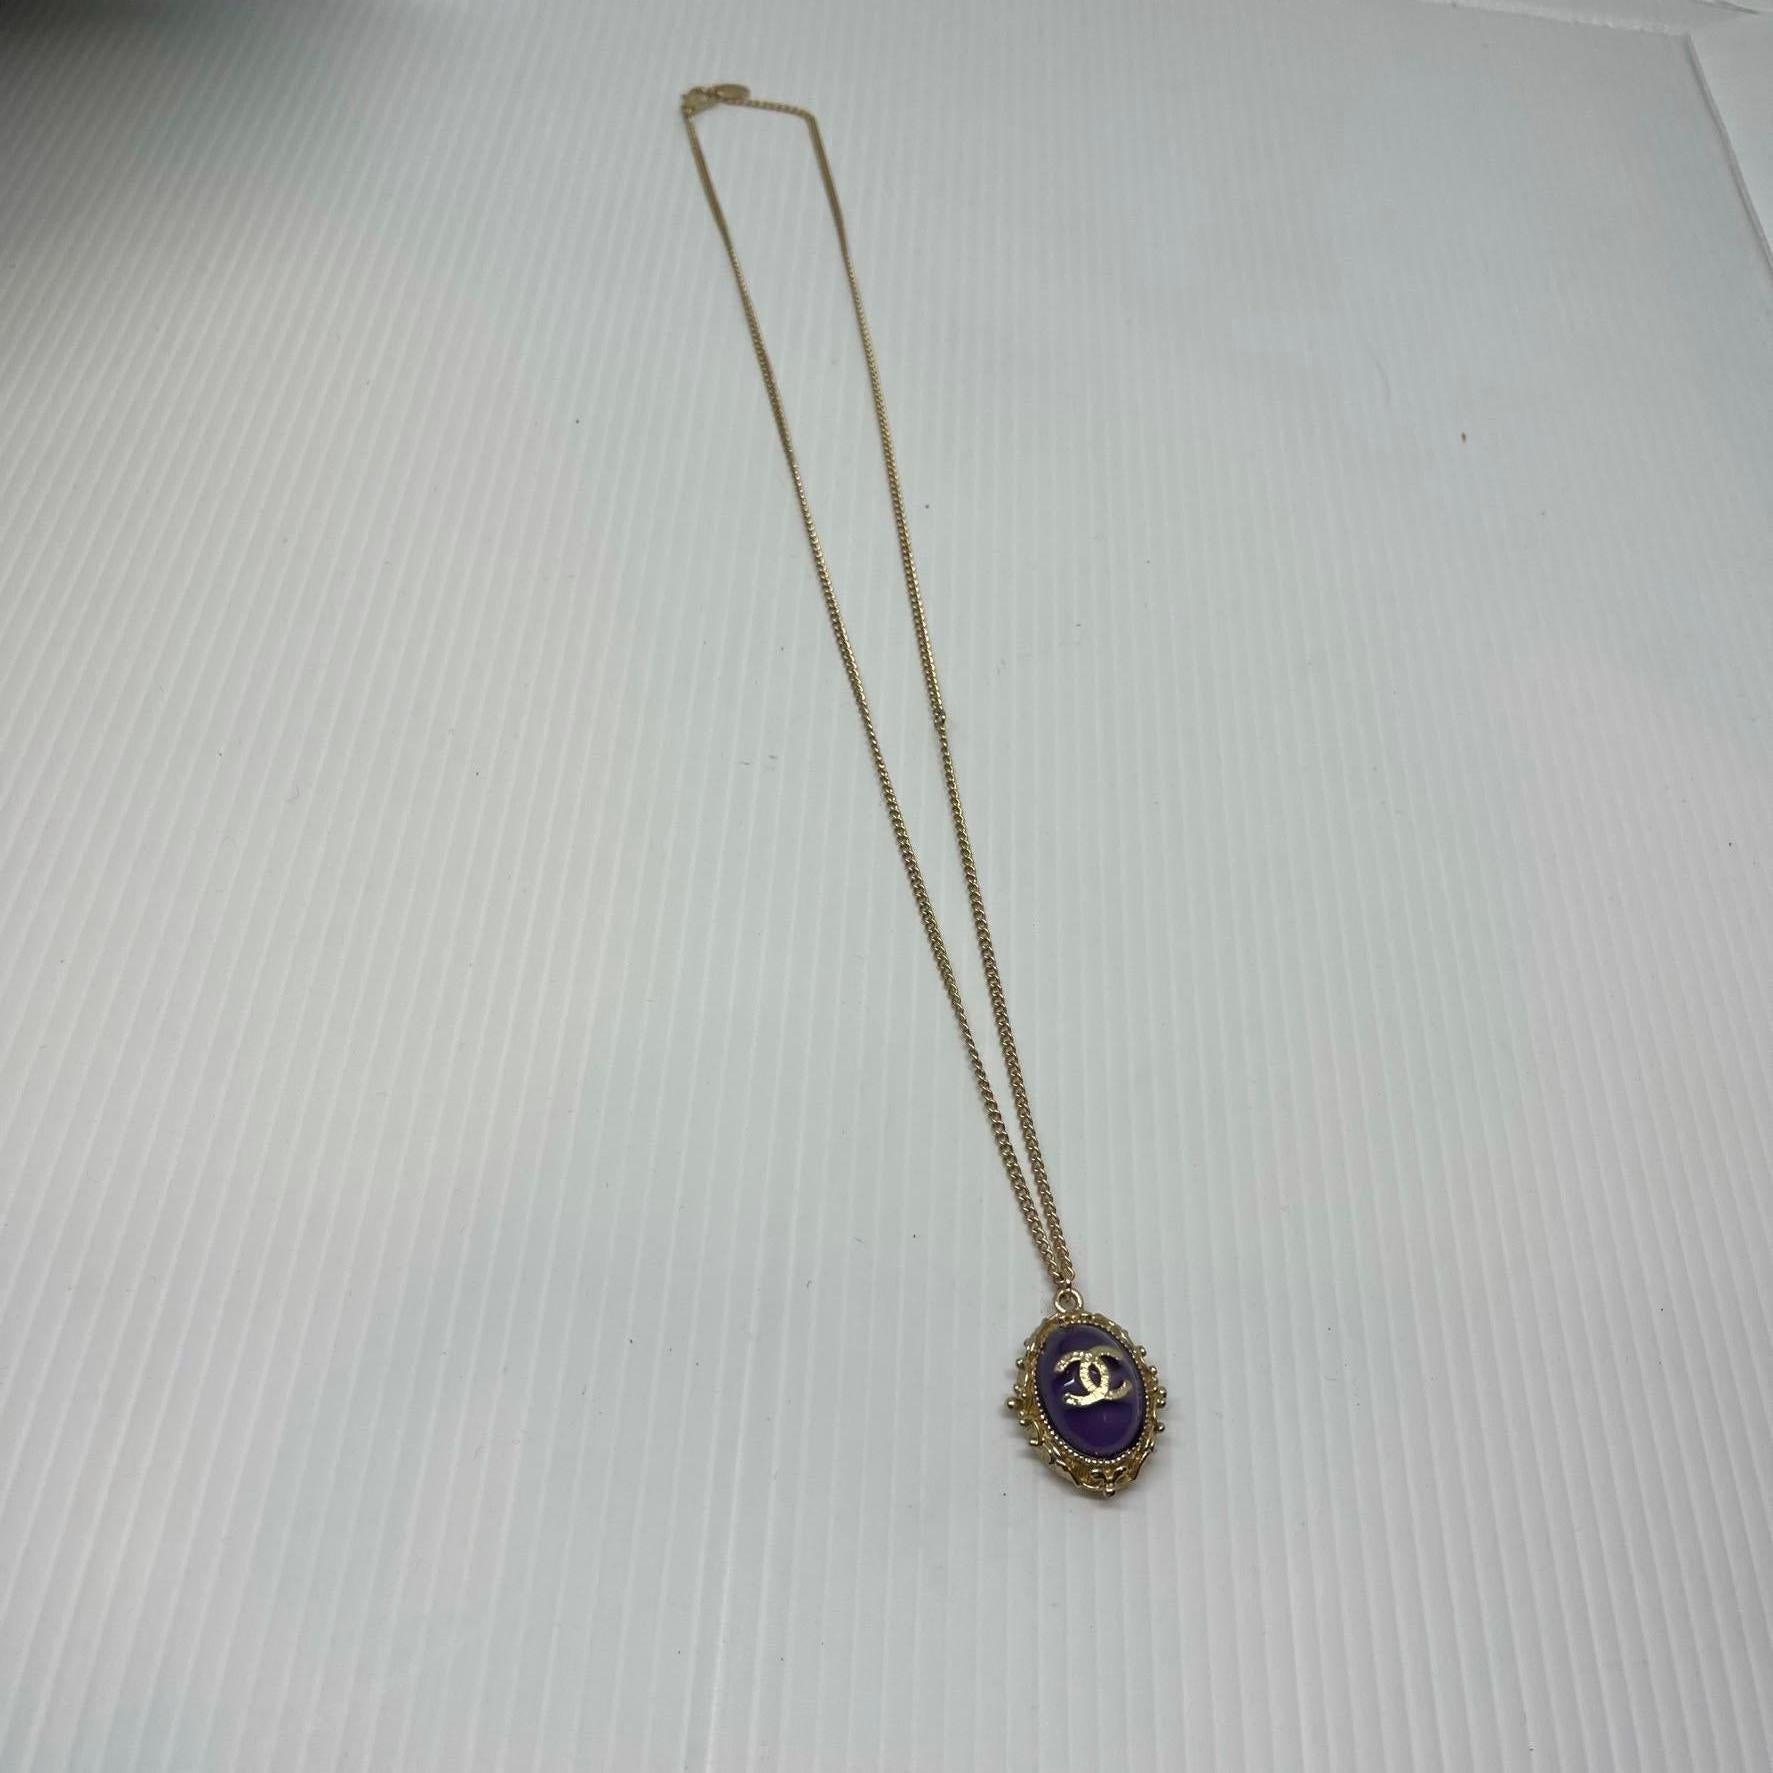 Beautiful chanel amethyst stone pendant from 2012 collection. In excellent condition overall. Comes as it is.